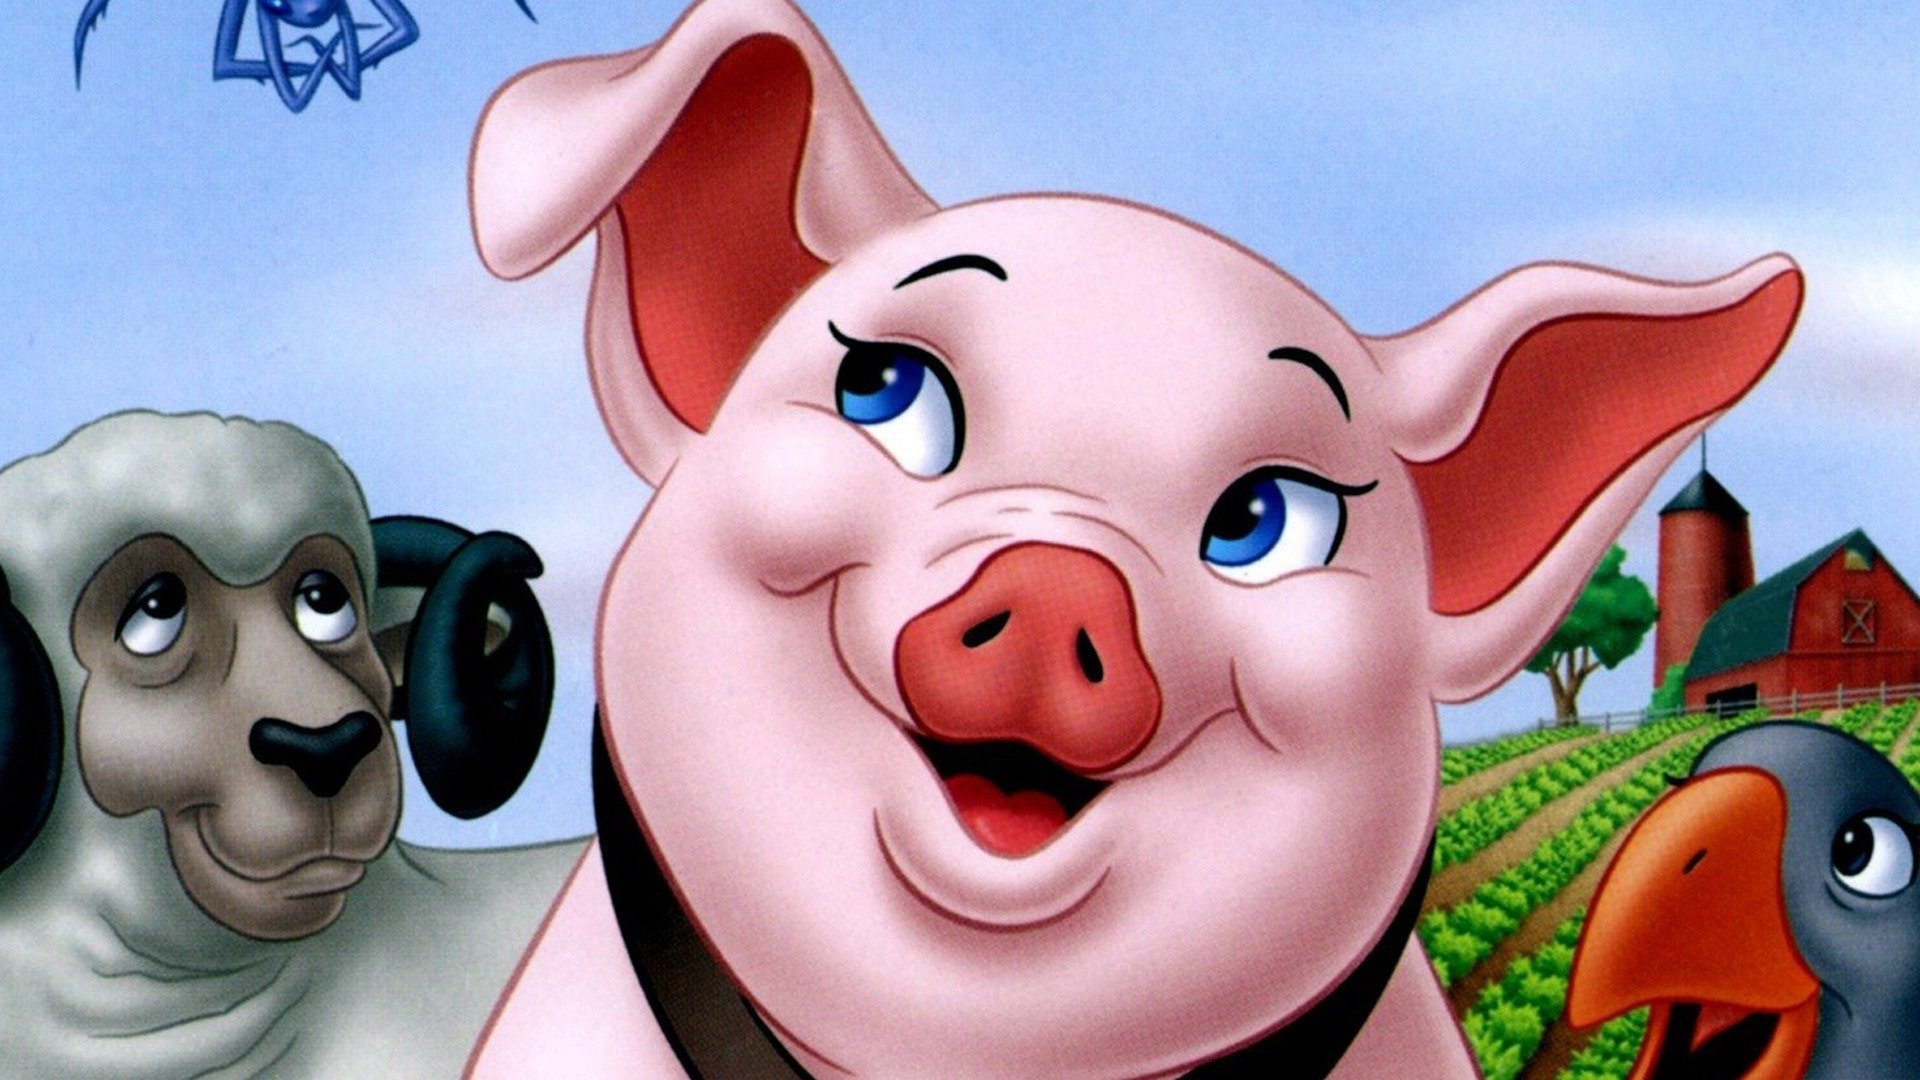 Charlotte's Web Official Clip Zuckerman's Famous Pig Trailers